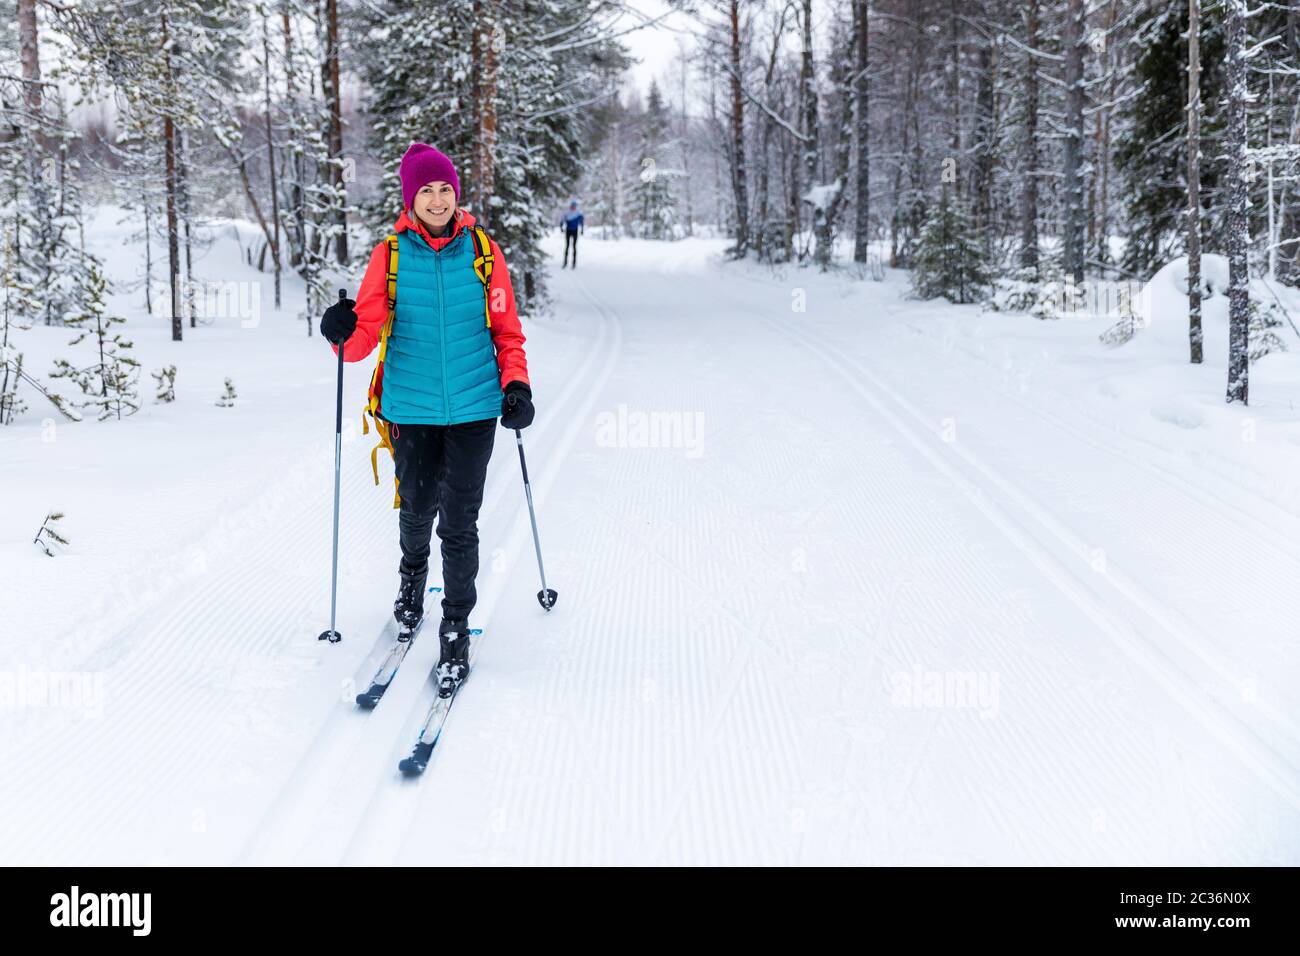 cross country skiing - woman with skis on snowy forest ski track. Akaslompolo, Finland Stock Photo